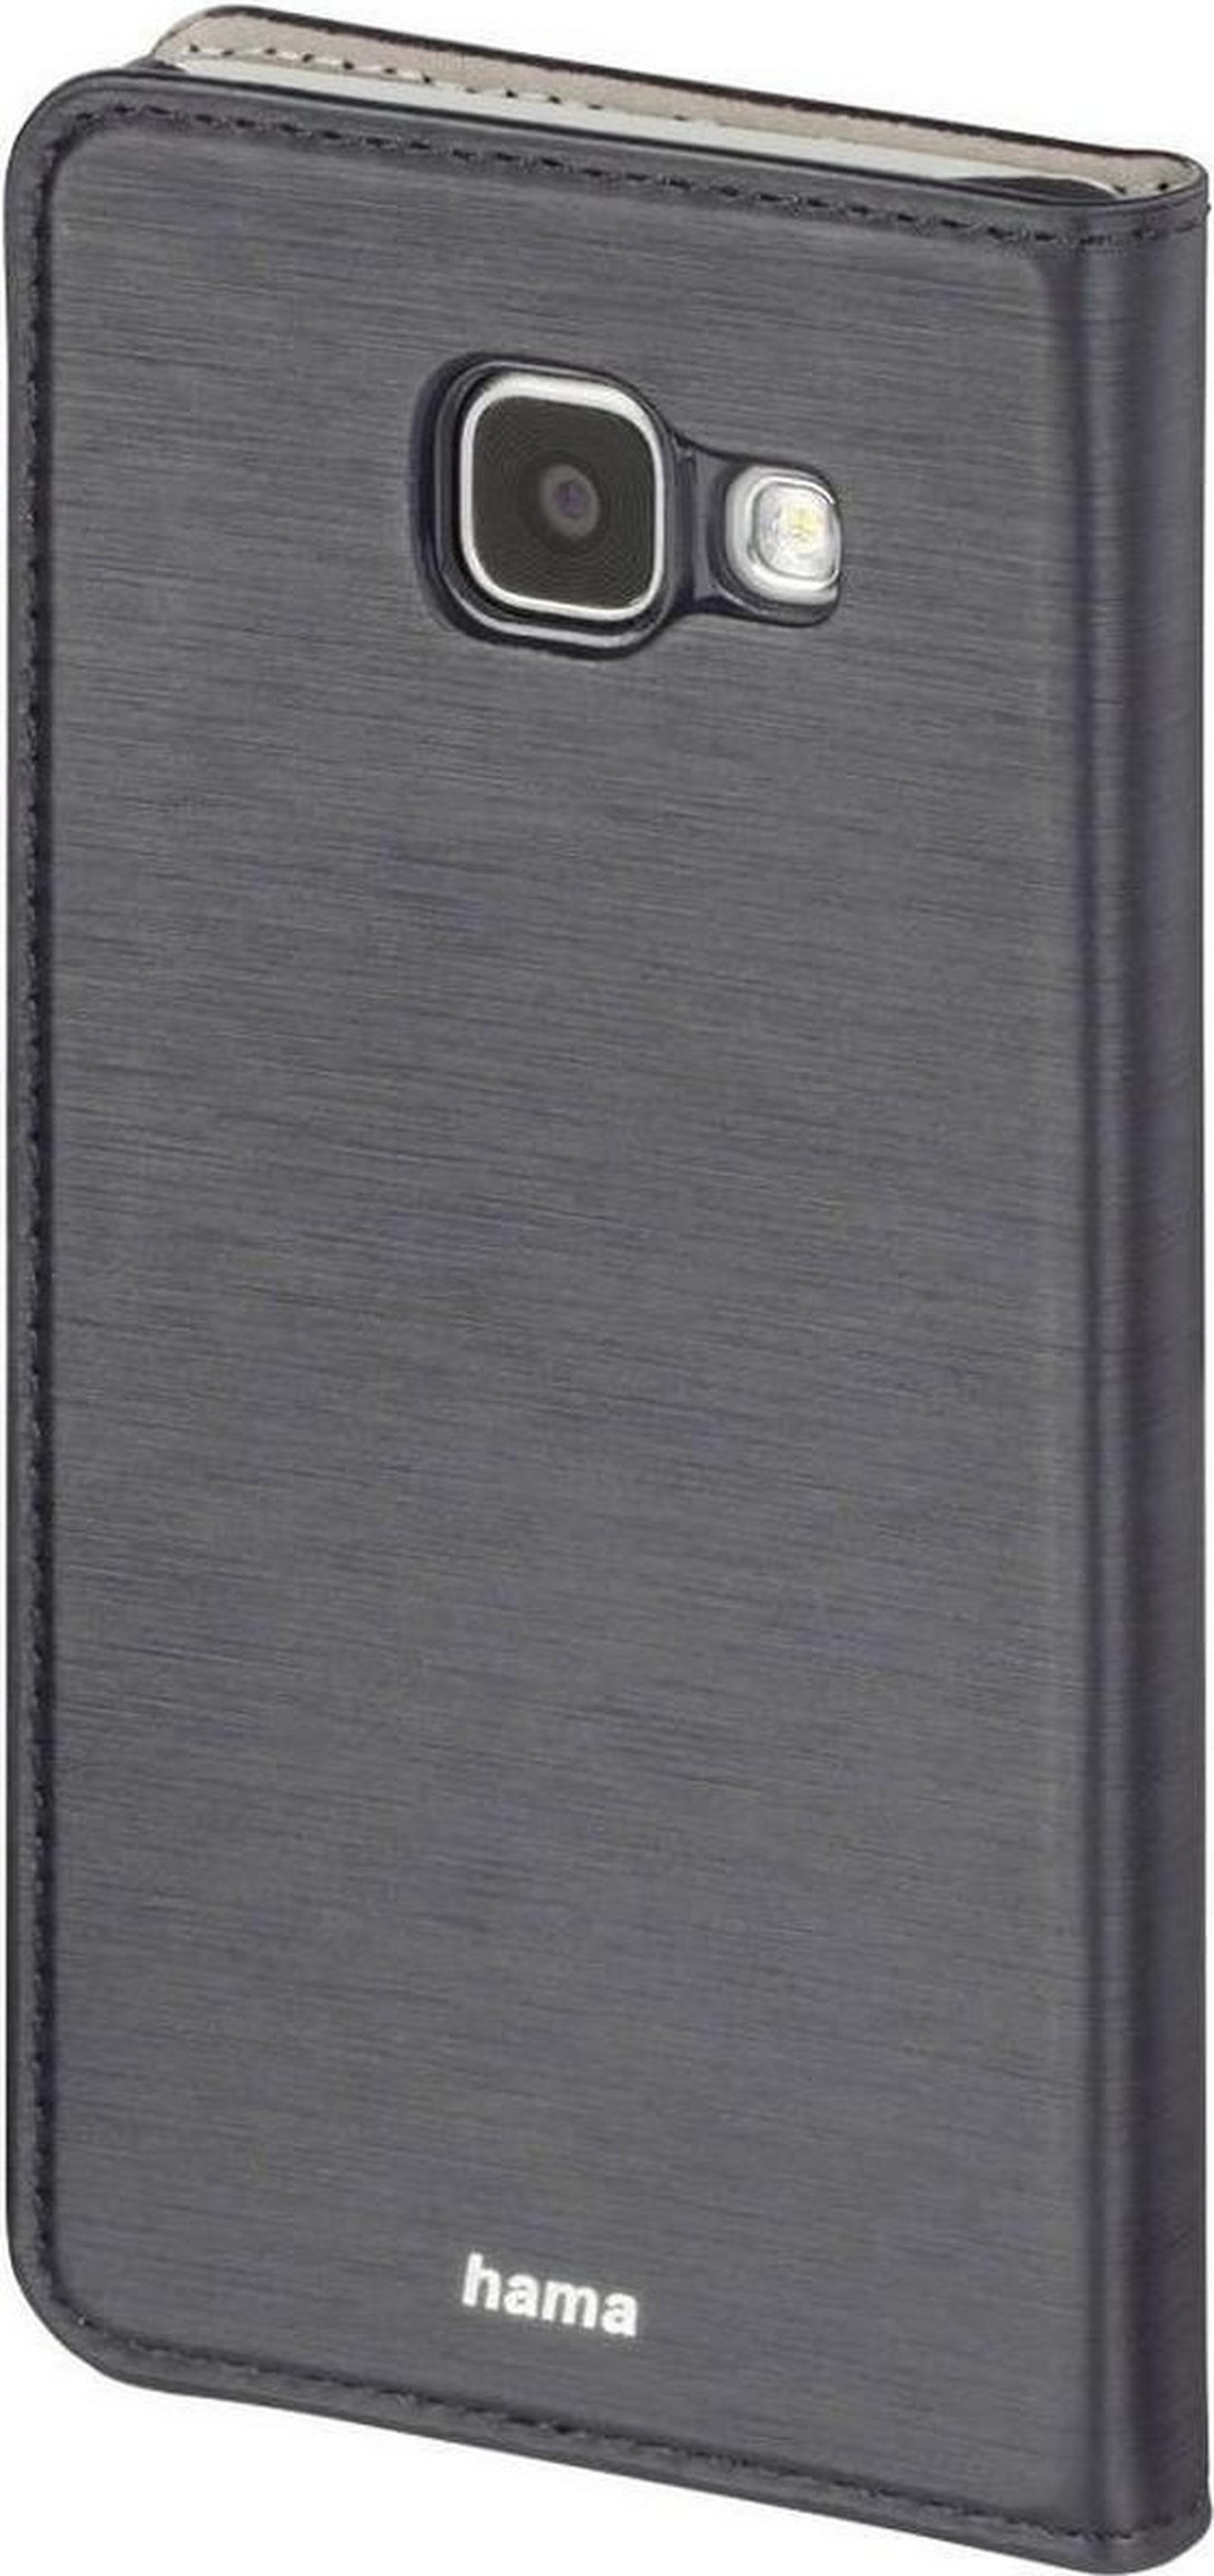 Hama Booklet Slim Cover Case For Galaxy A3 2017 (178728) - Grey